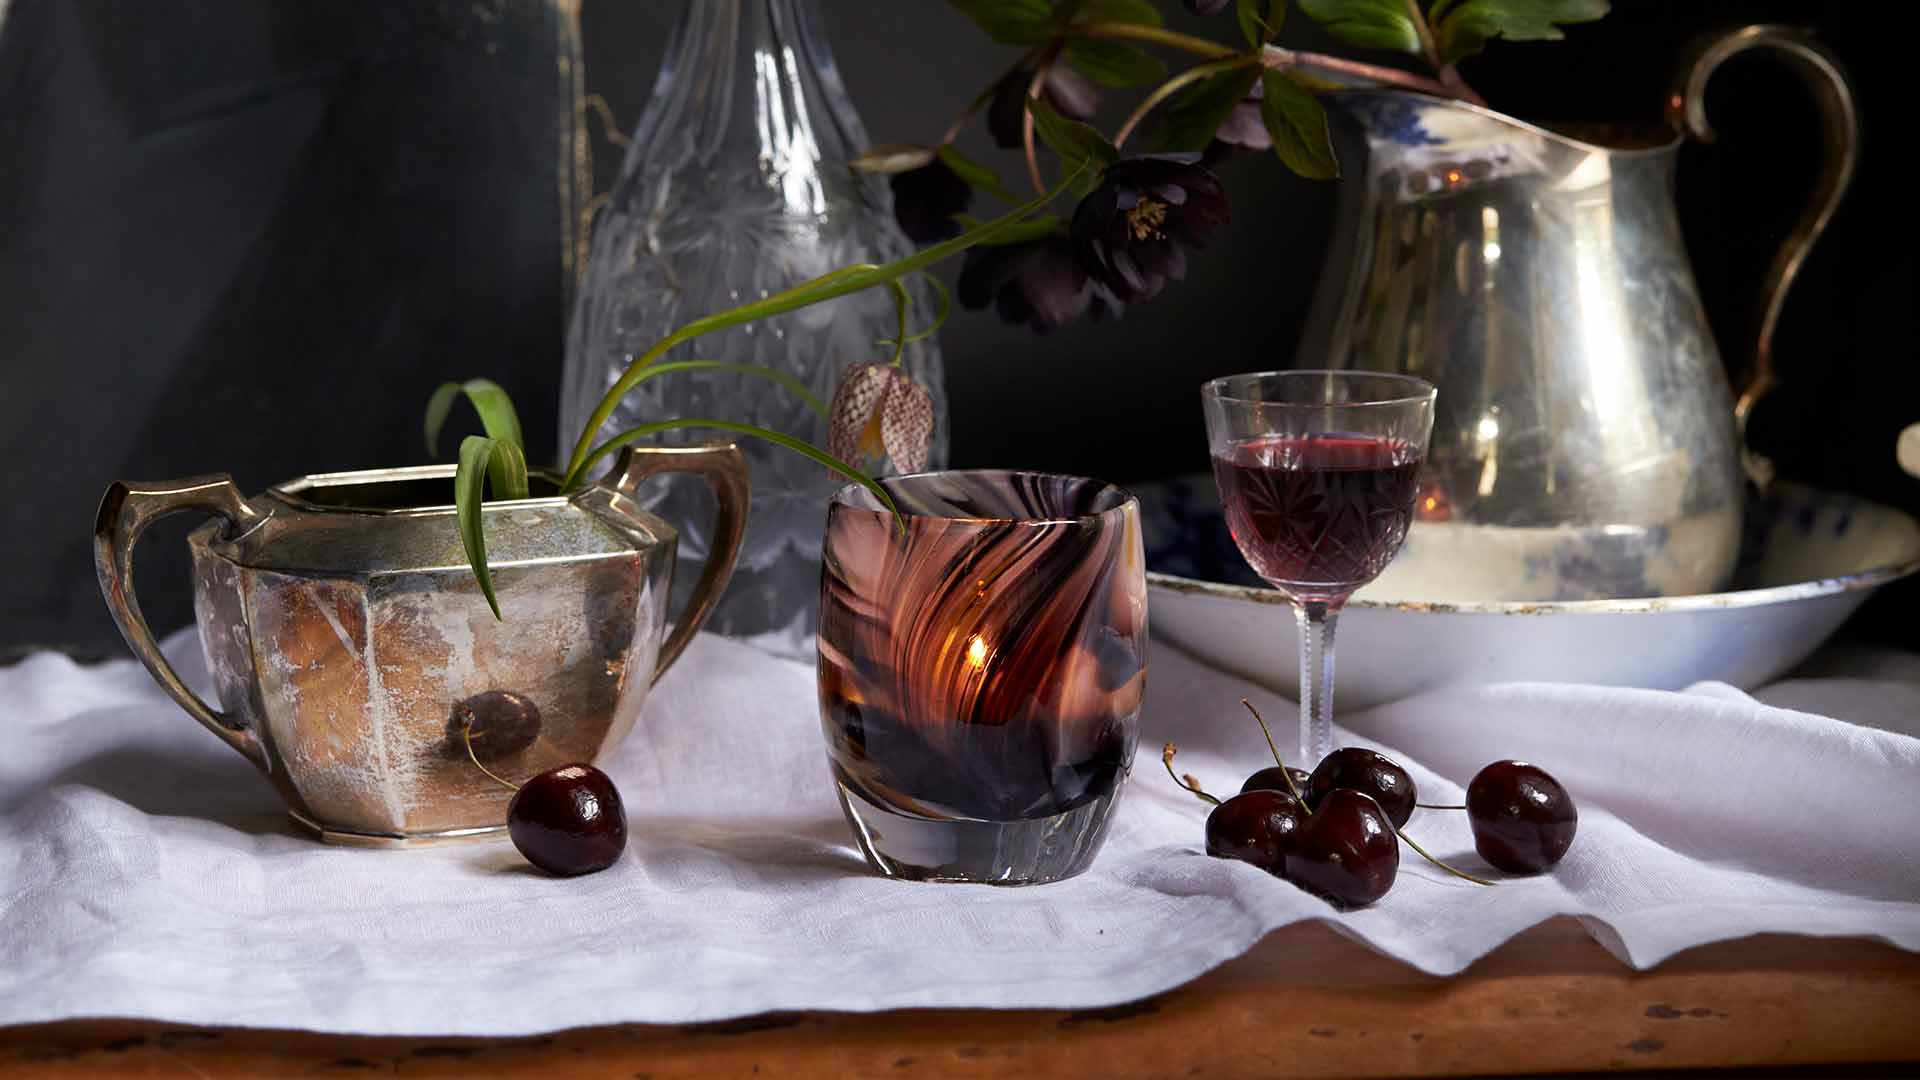 Exquisite a swirled merlot colored hand-blown glass votive candle holder, lit on an abundant dining table